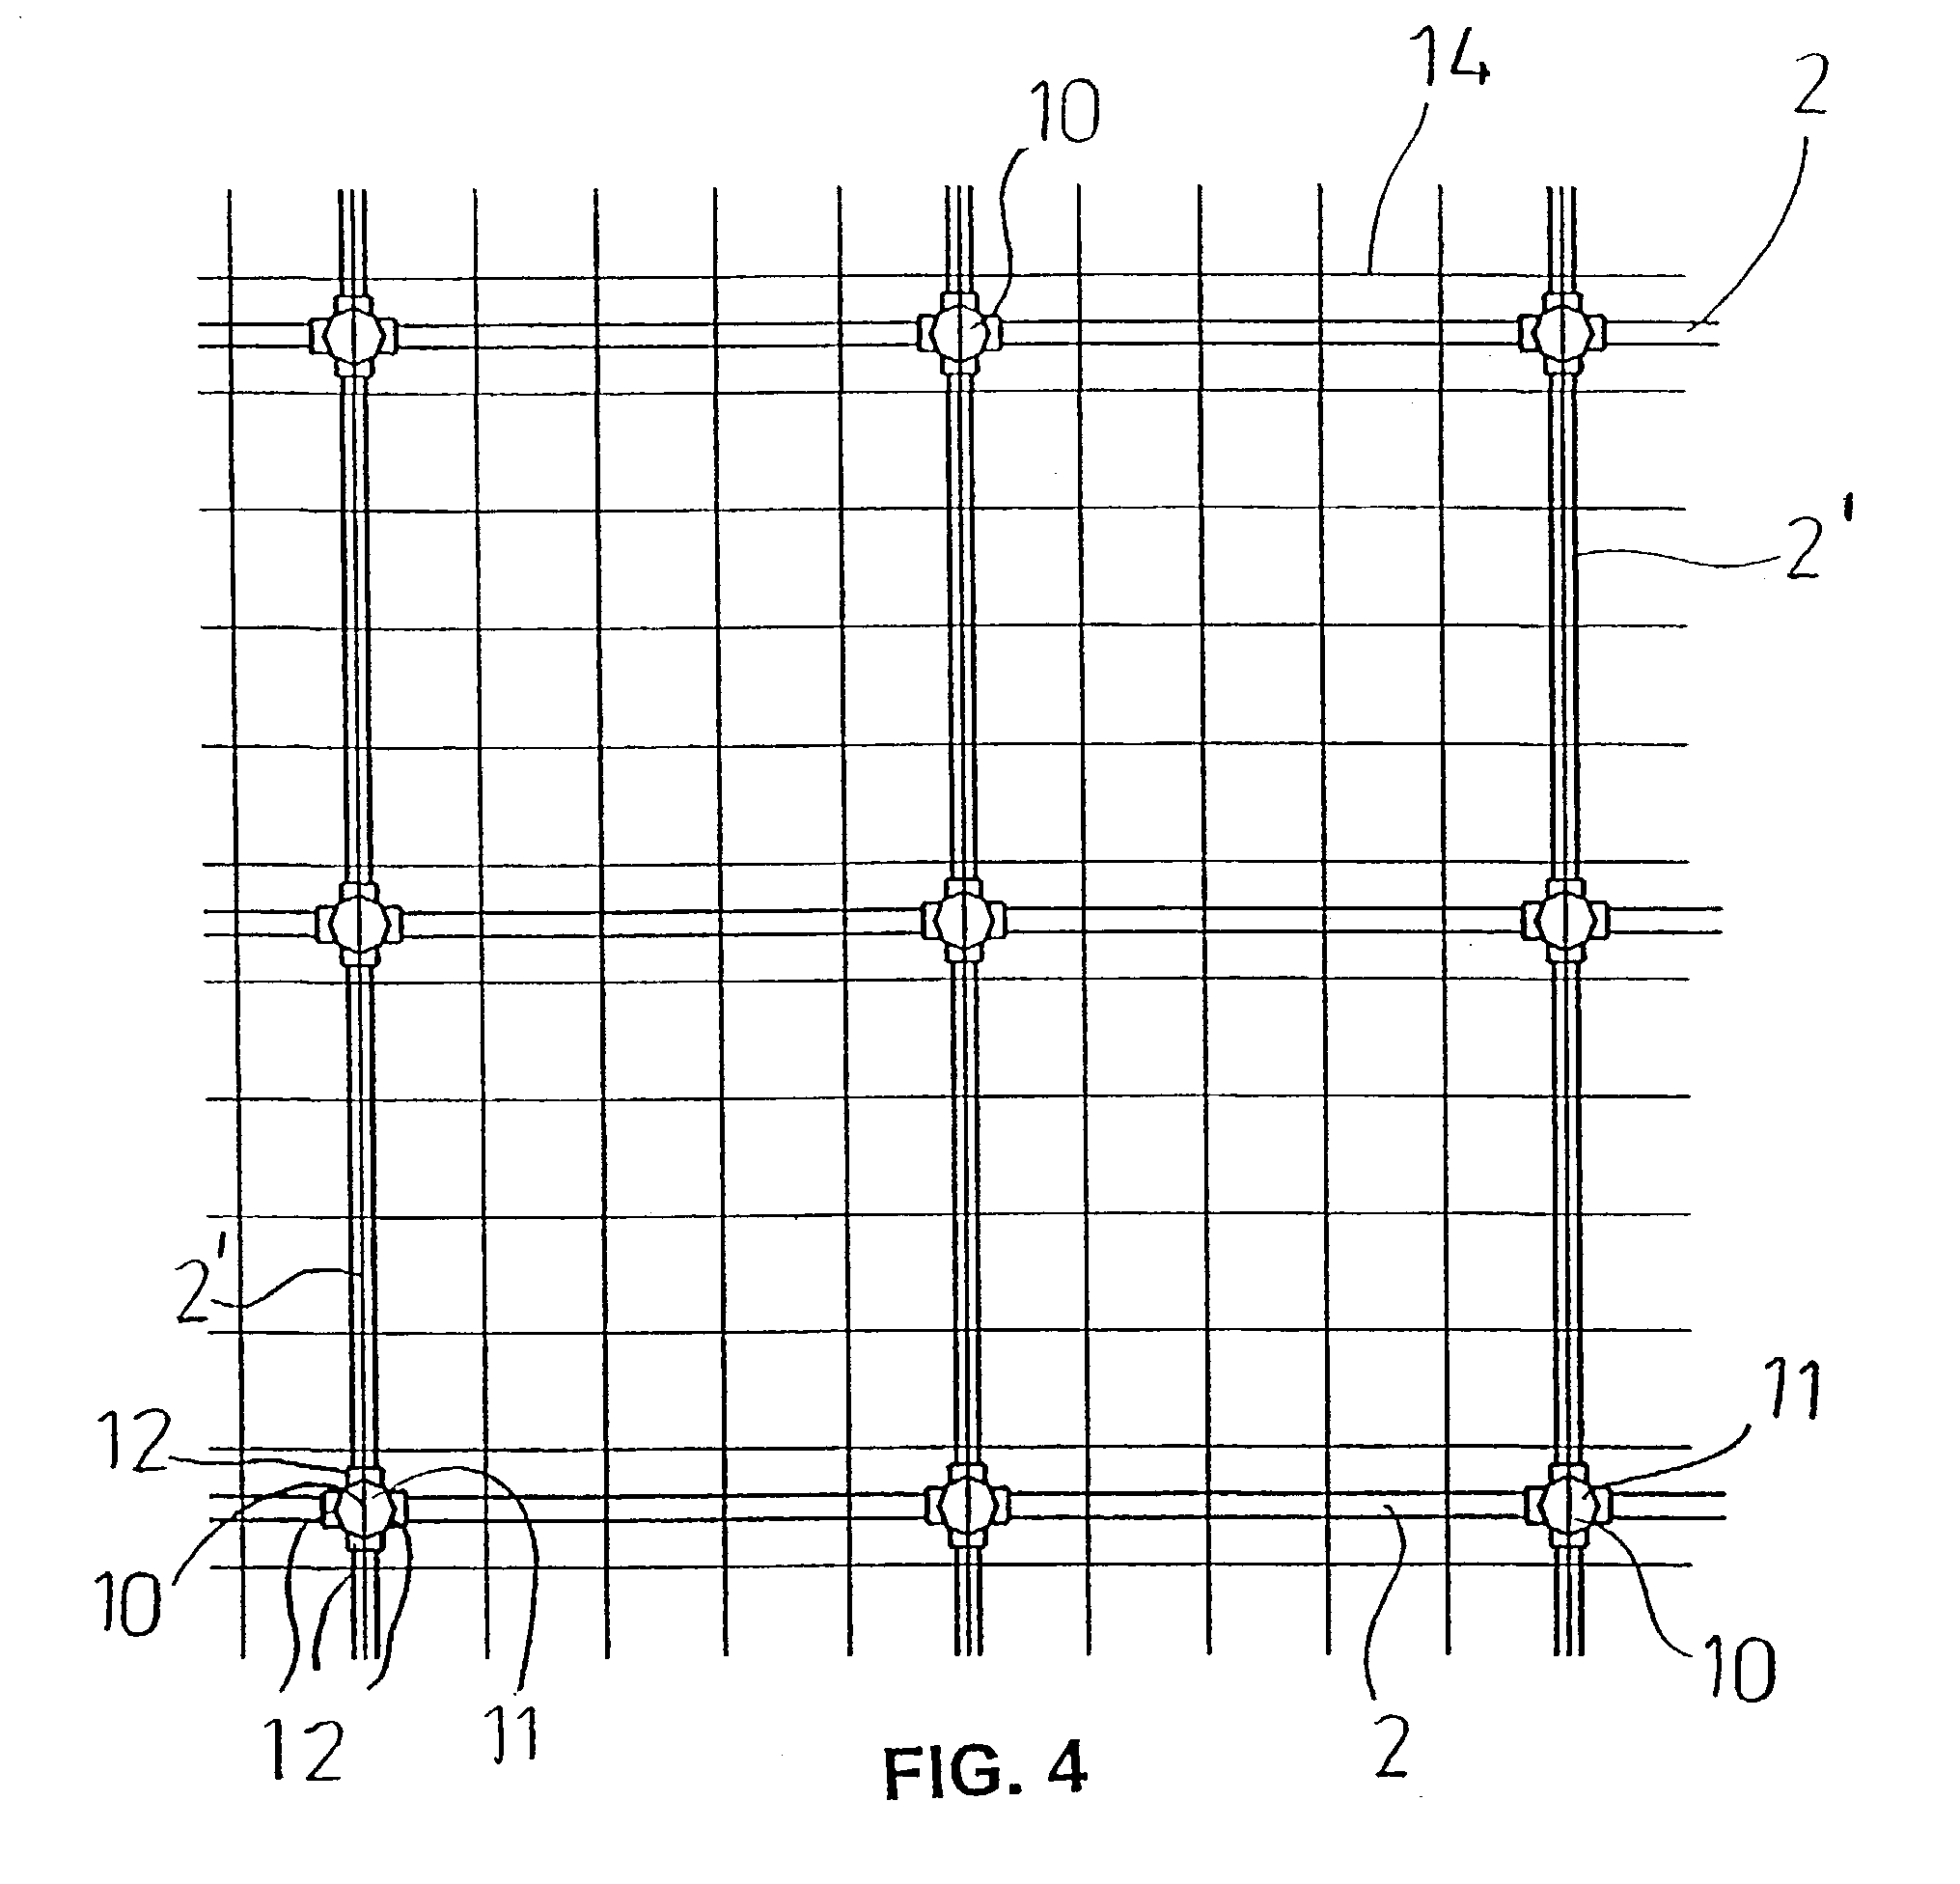 Method and system for constructing large, continuous, concrete slabs